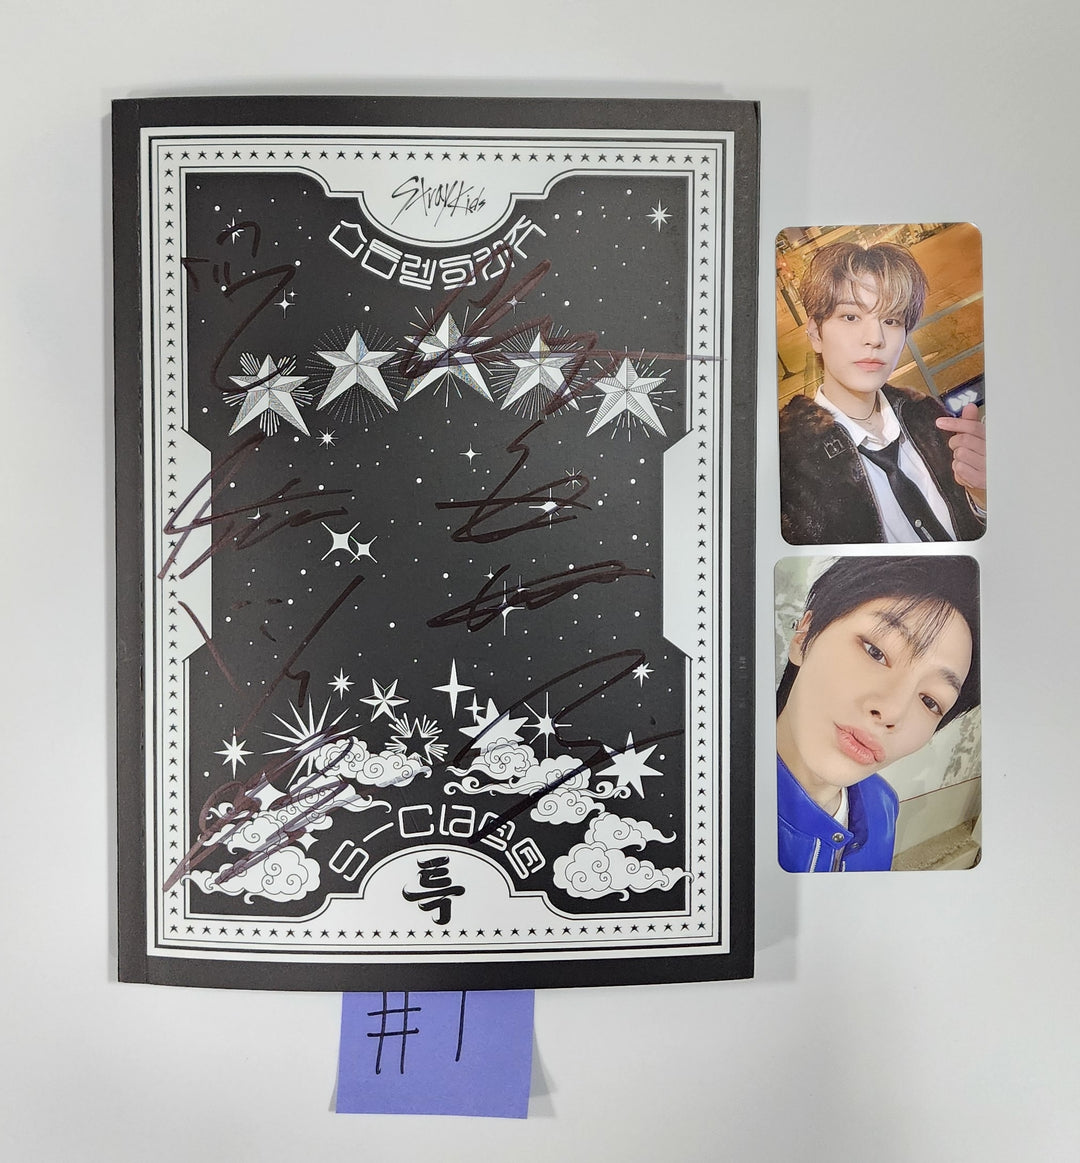 Stray Kids "★★★★★ 5-STAR" - Hand Autographed(Signed) Promo Album